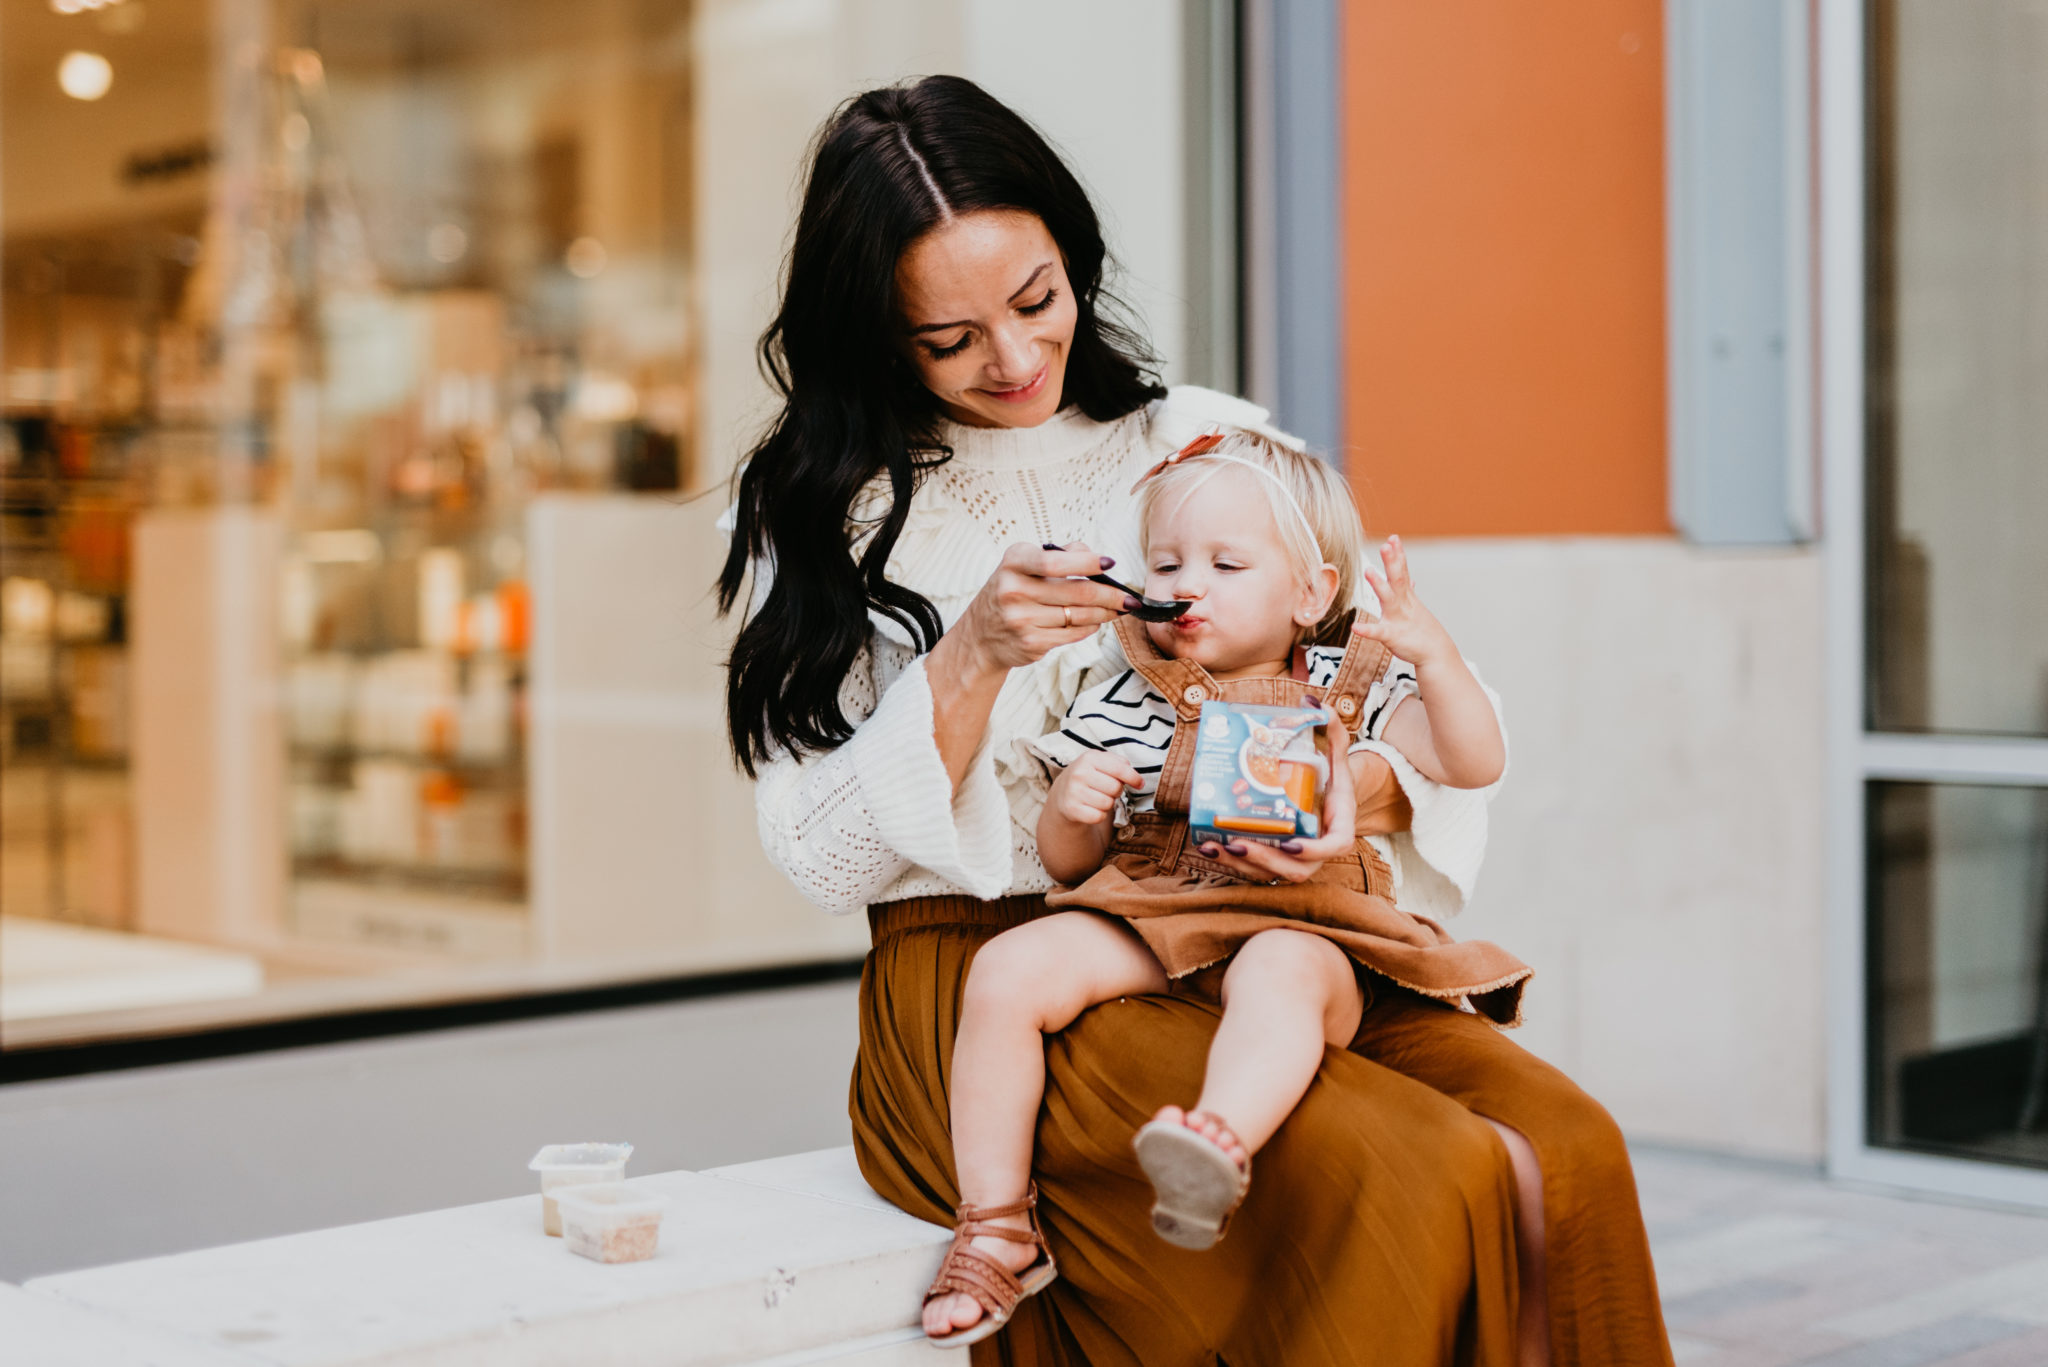 How to create special moments with children, tips featured by top US lifestyle blog, Outfits & Outings